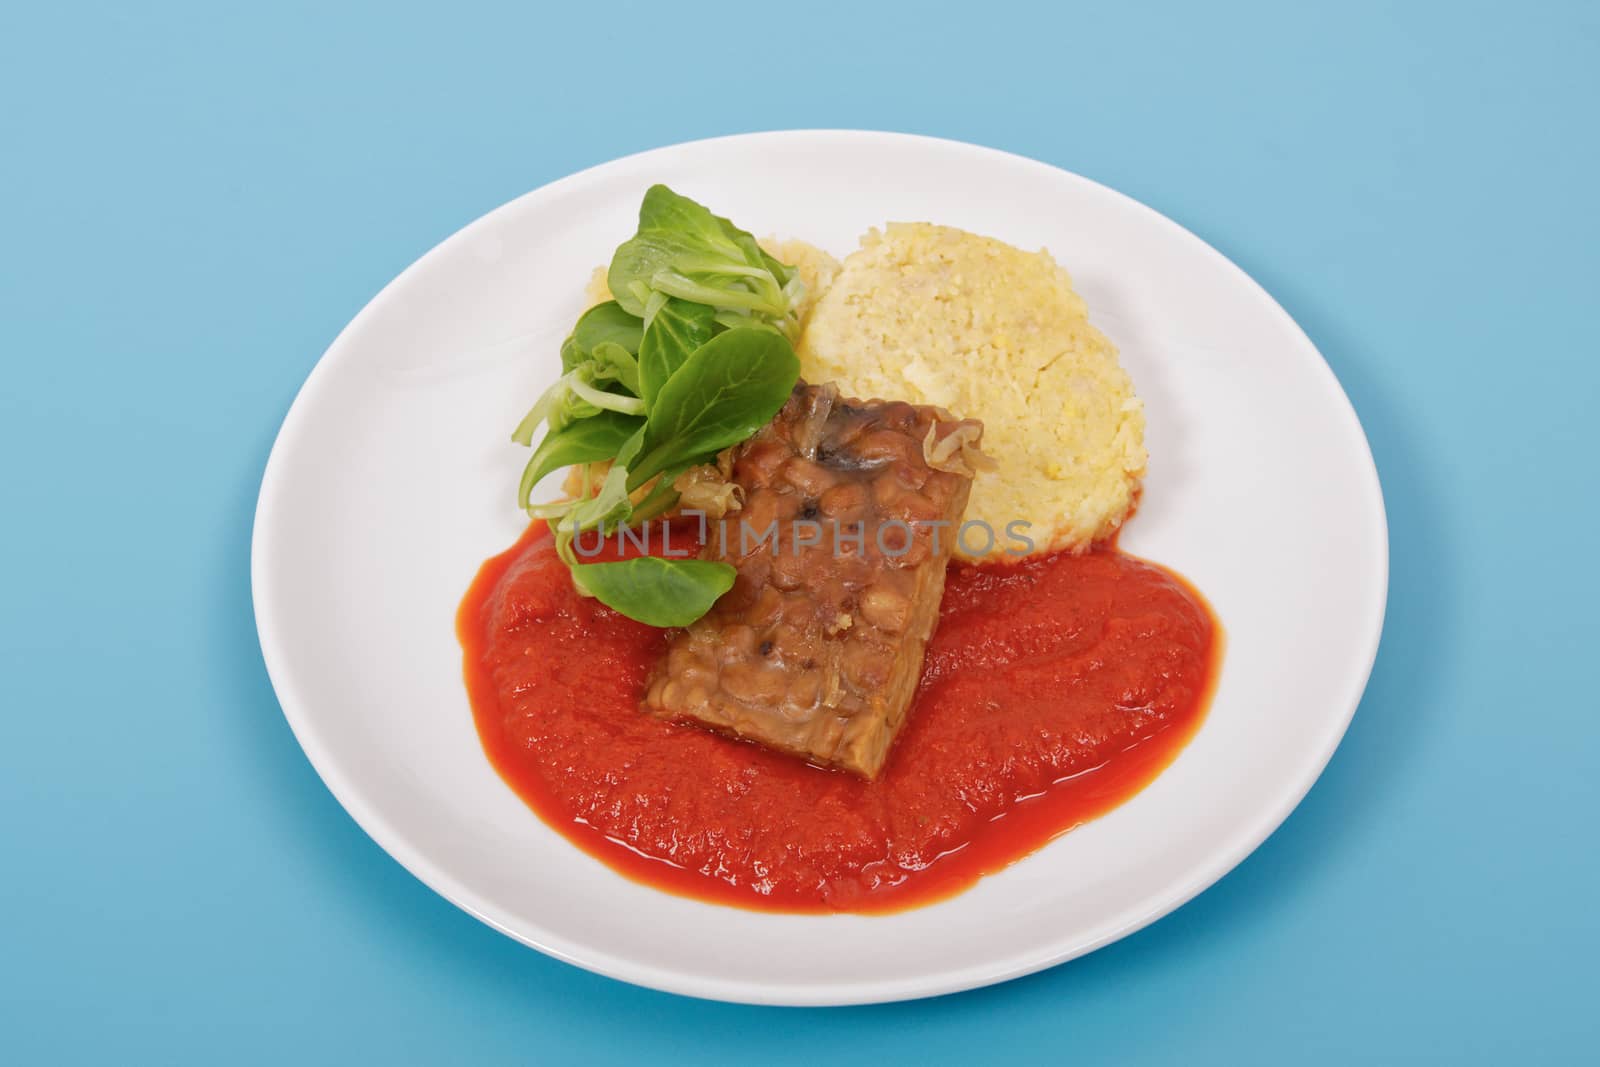 Tempeh with tomato sauce and dumplings on a blue background